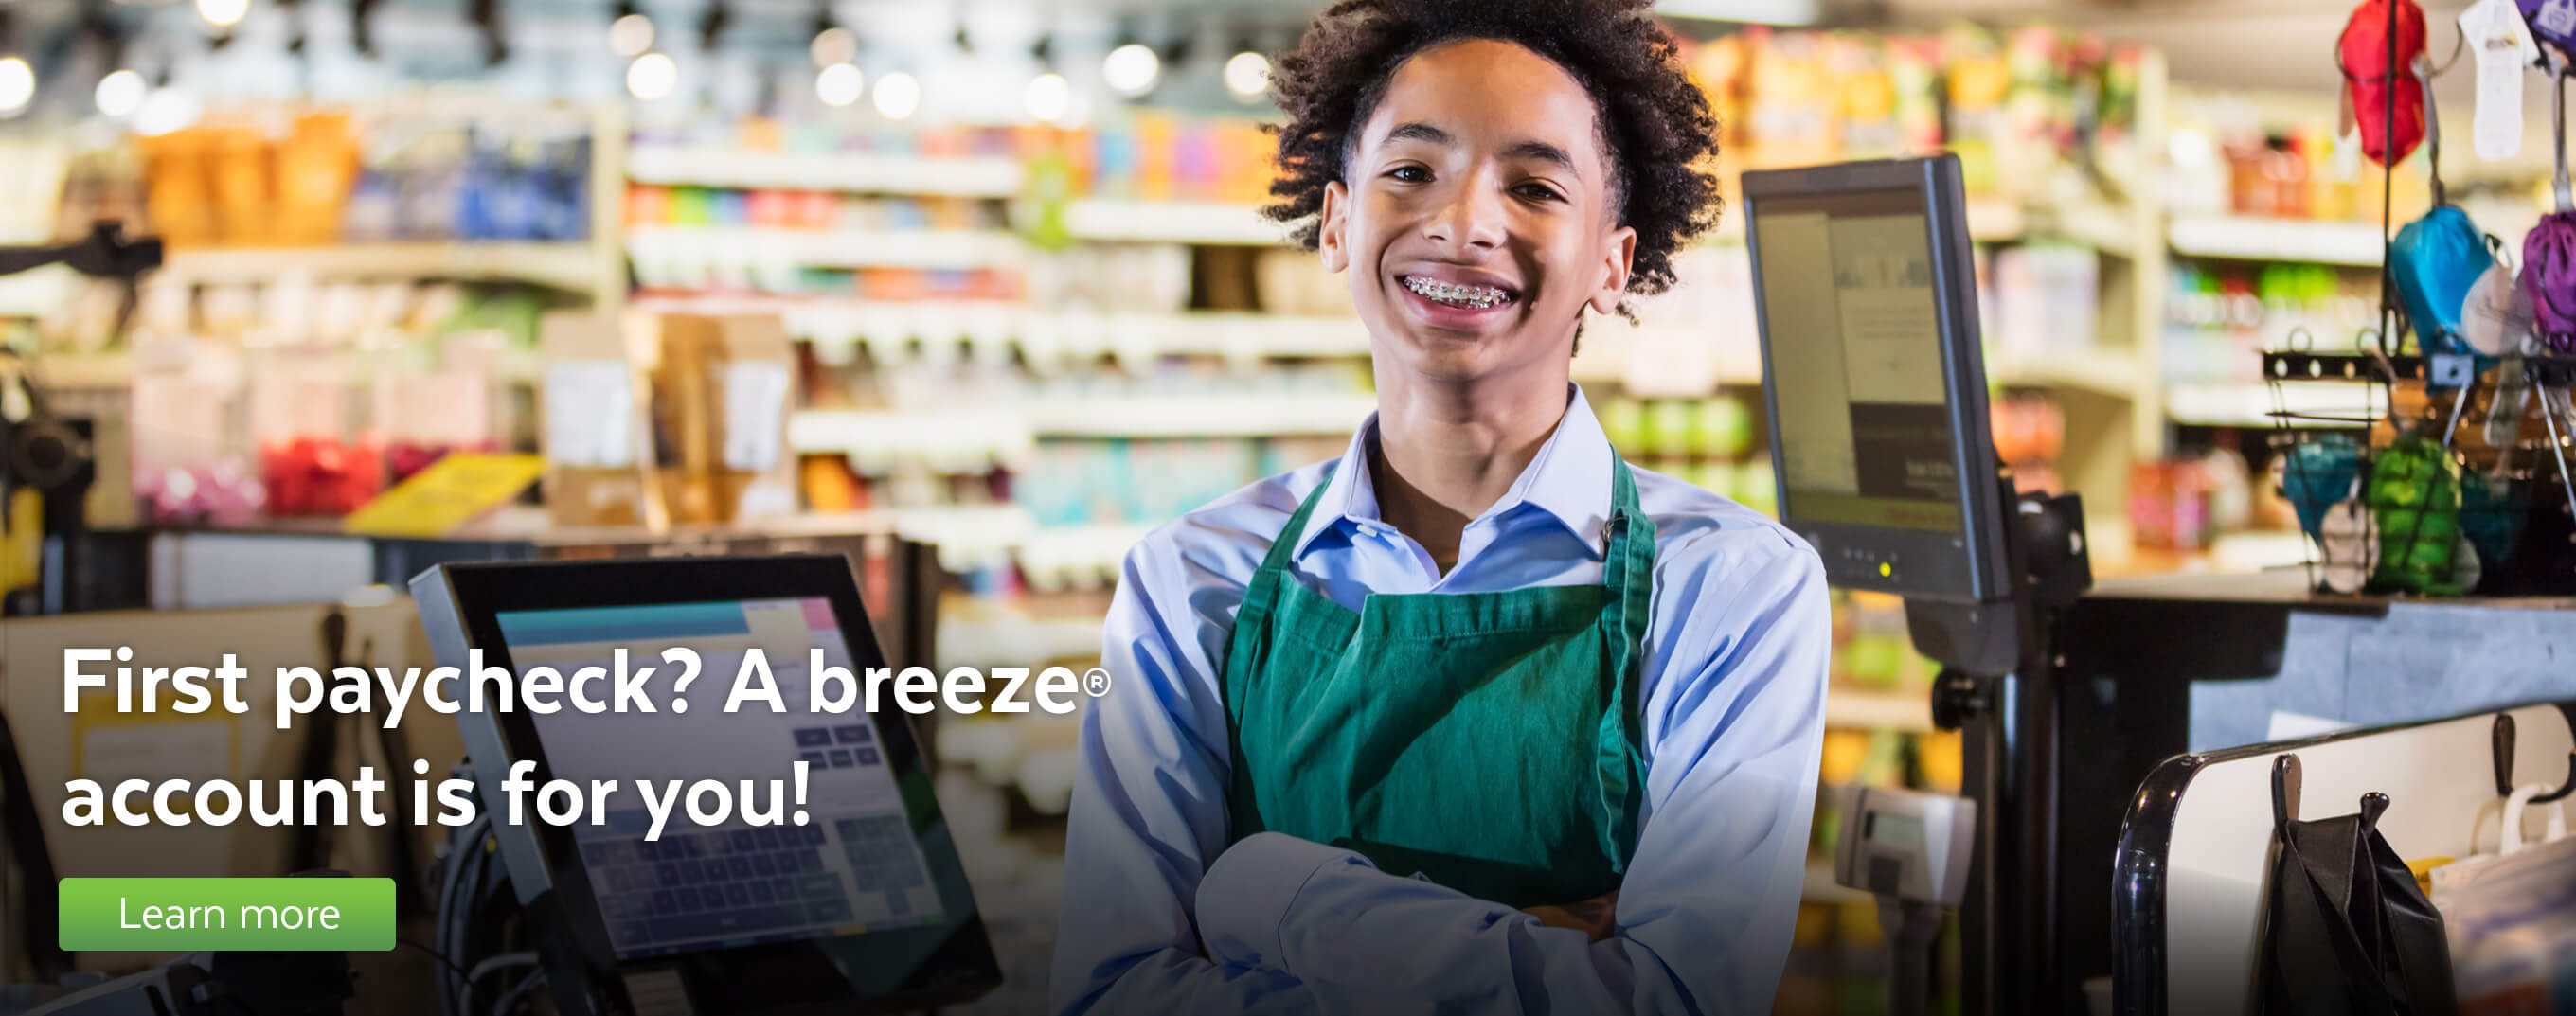 First paycheck? A breeze account is for you!